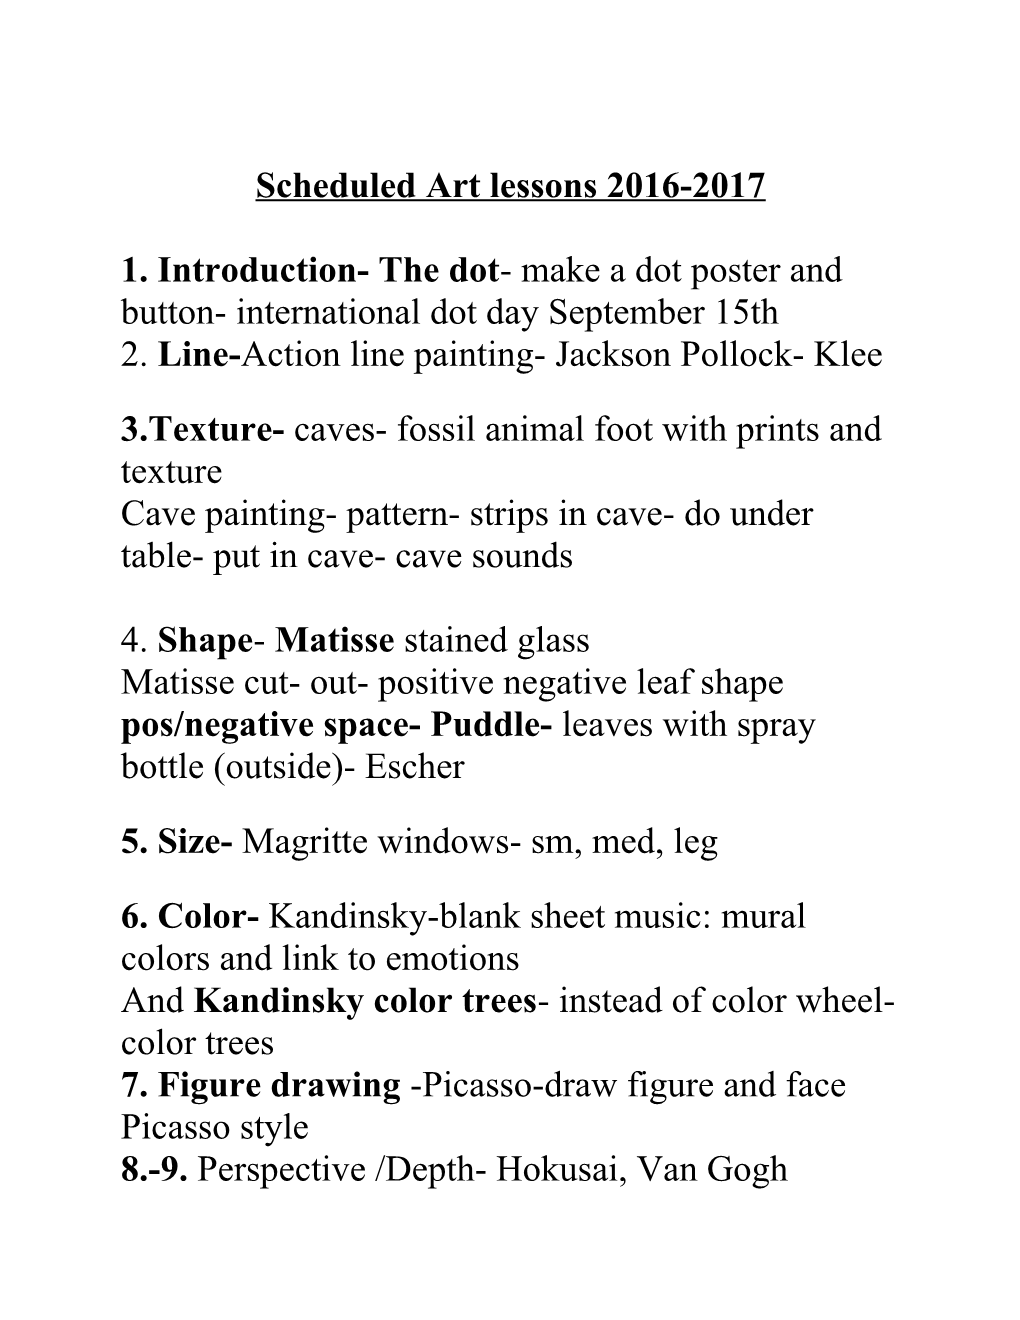 Scheduled Art Lessons 2016-2017